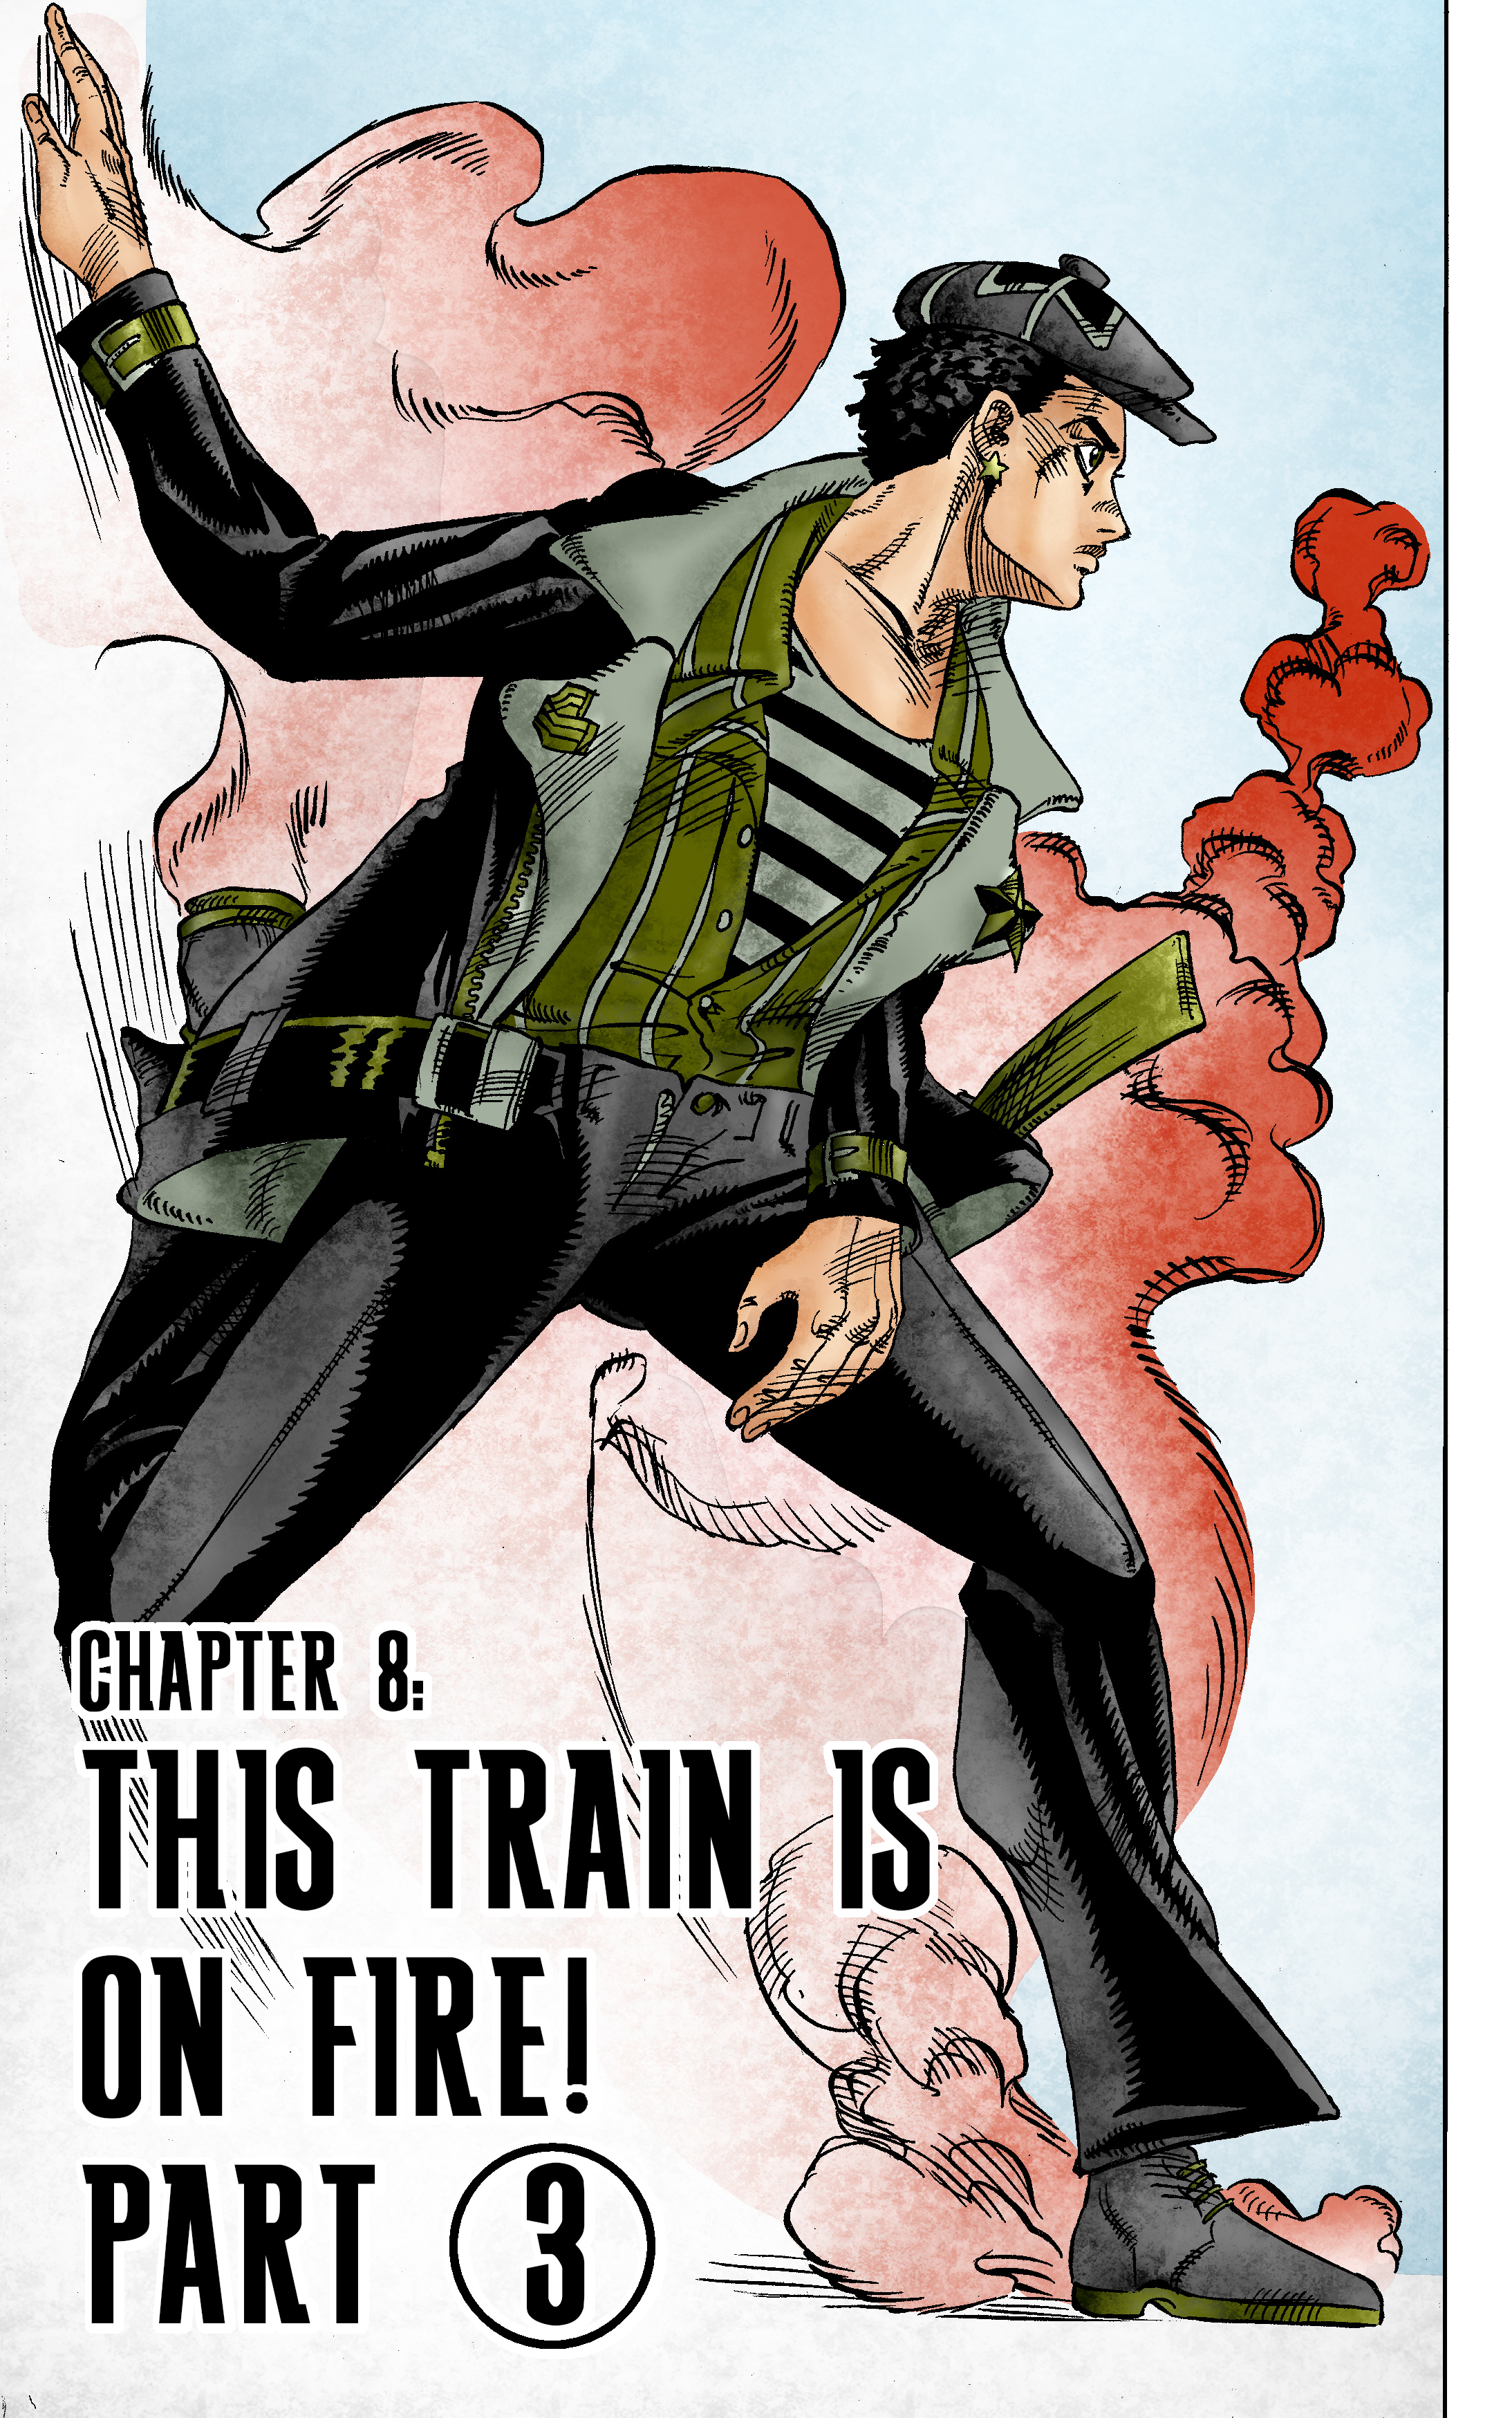 Jojo's Bizarre Adventure: Moscow Calling (Doujinshi) Vol.2 Chapter 8: This Train Is On Fire Part 3 - Picture 1